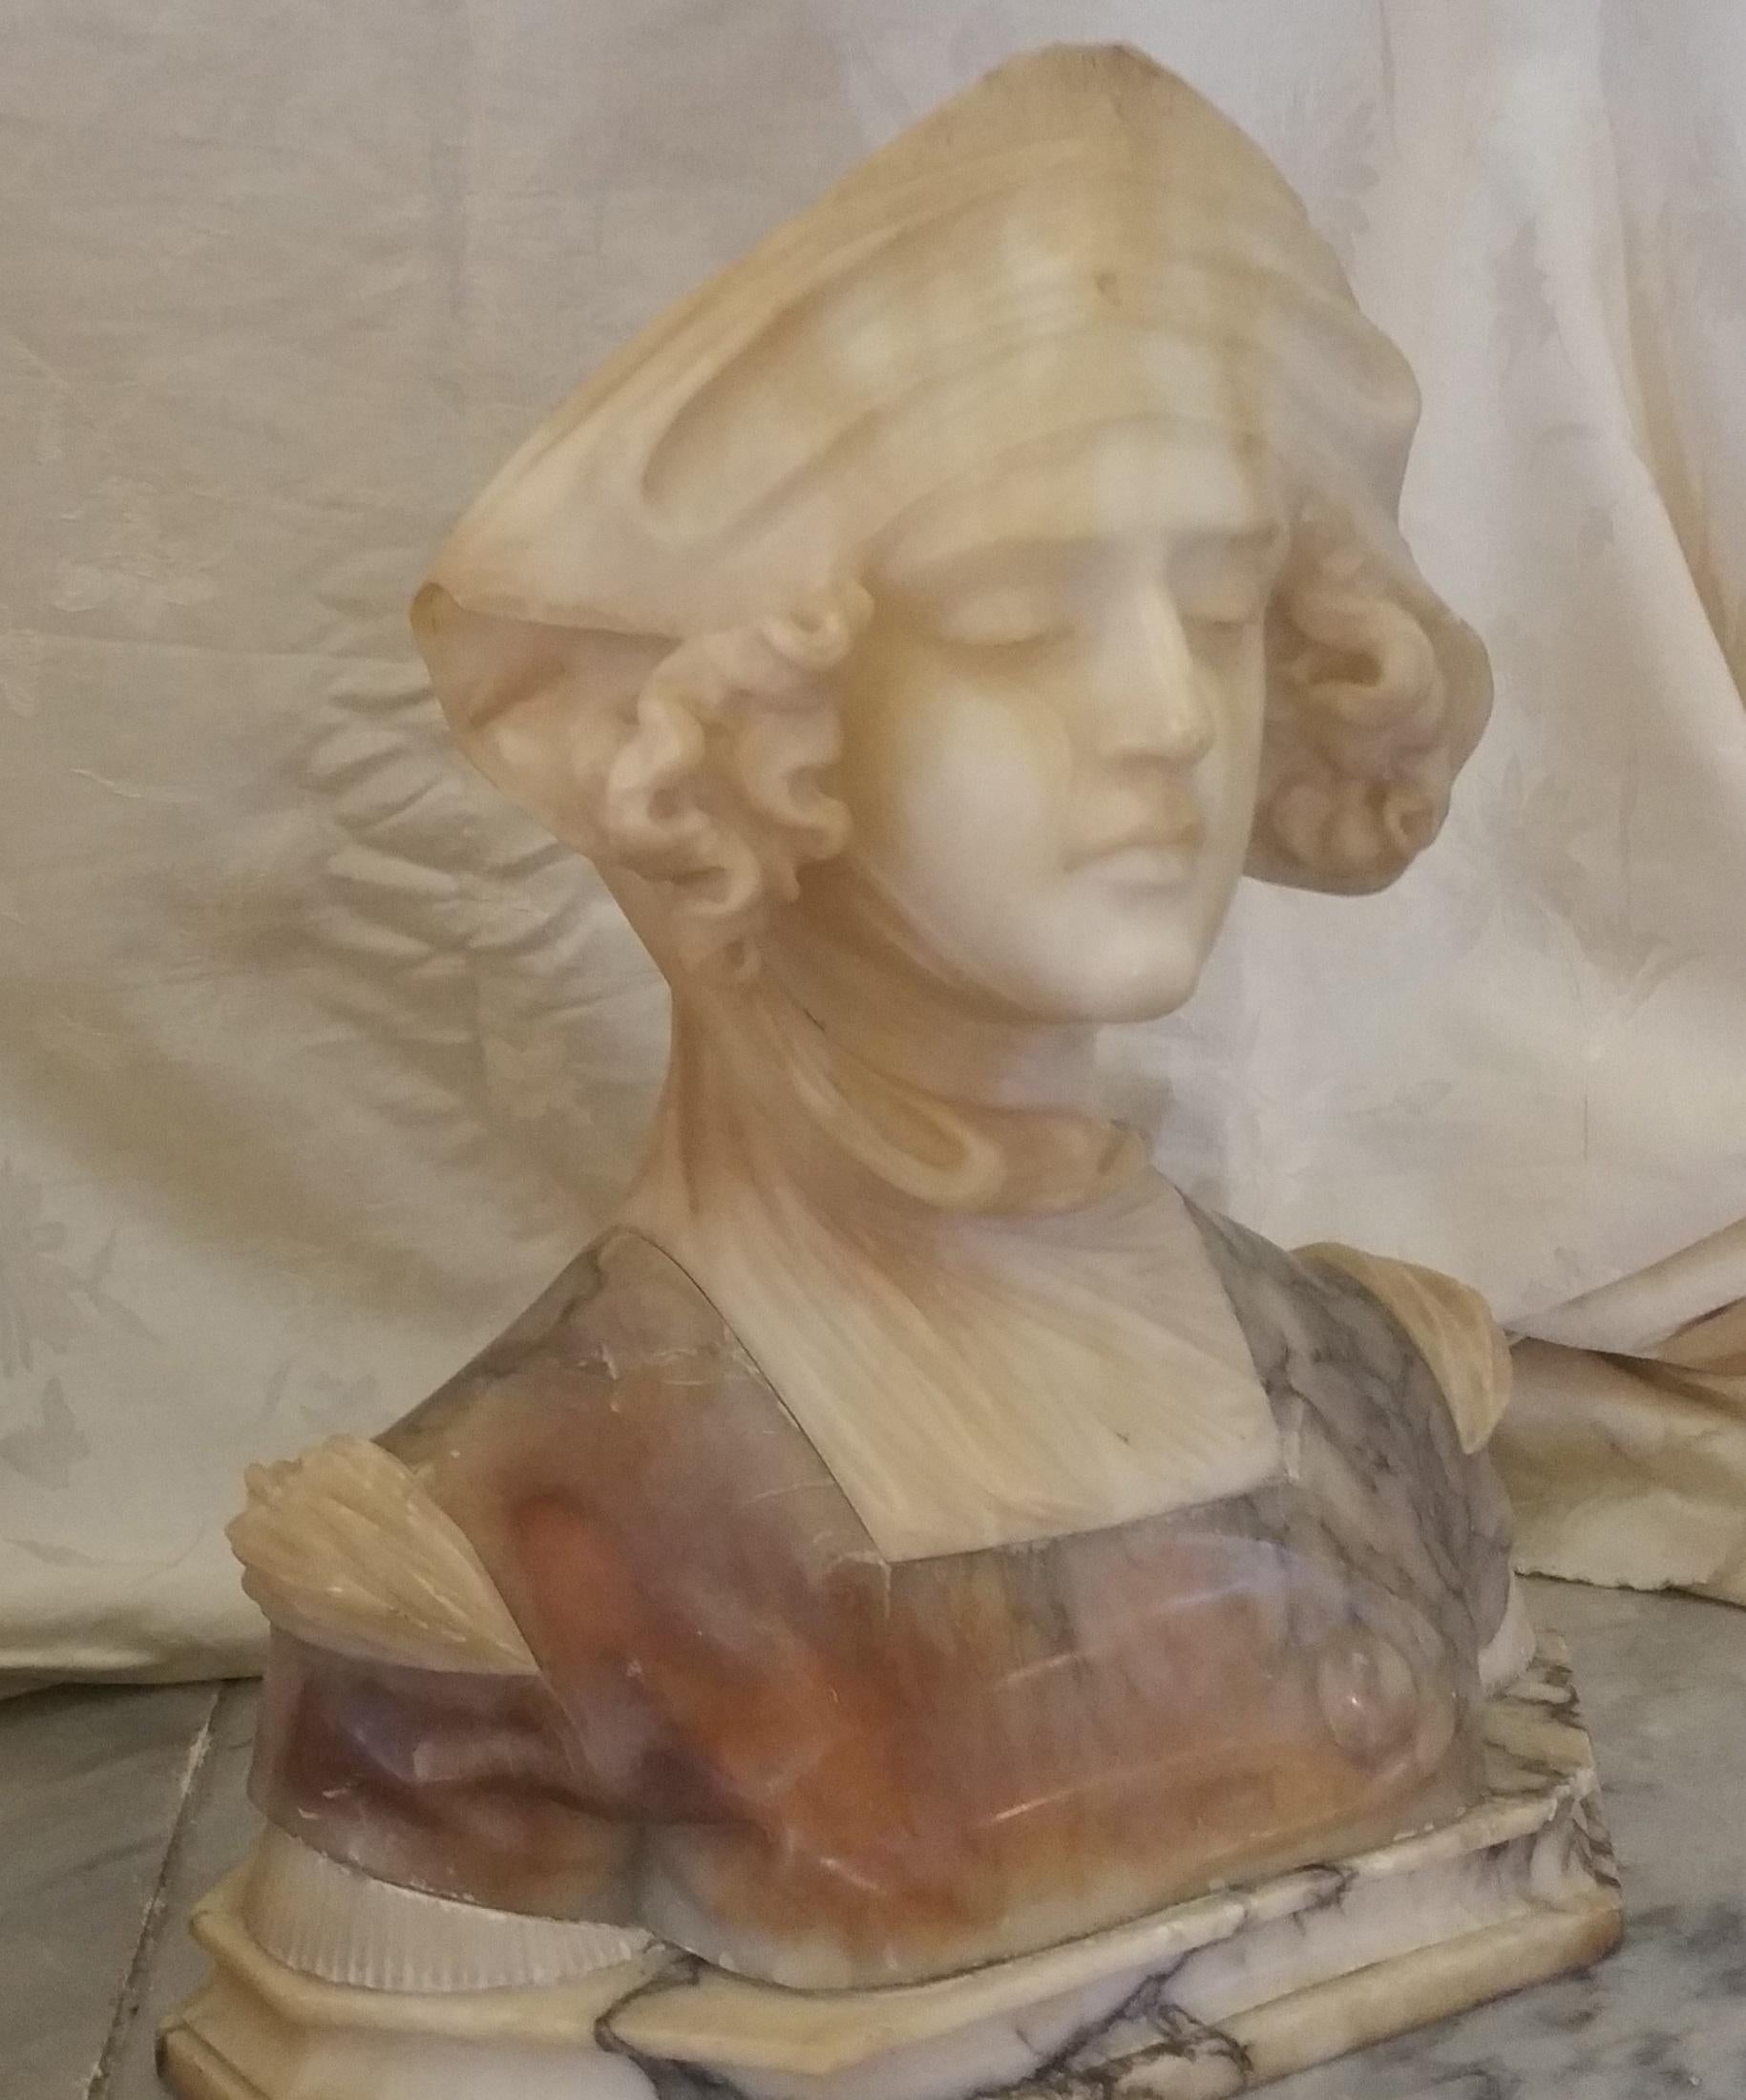 Art Nouveau Alabaster & Marble Bust Sculpture of Dante’s Beatrice (Italian 19th/early 20th century 
“Dante’s Beatrice”  
Anonymous
Multi-color Marble & Alabaster
Size: Hight 20 ¼” x Width 19” x Wide  8 ½” 
Provenance: Saratoga Springs, NY,